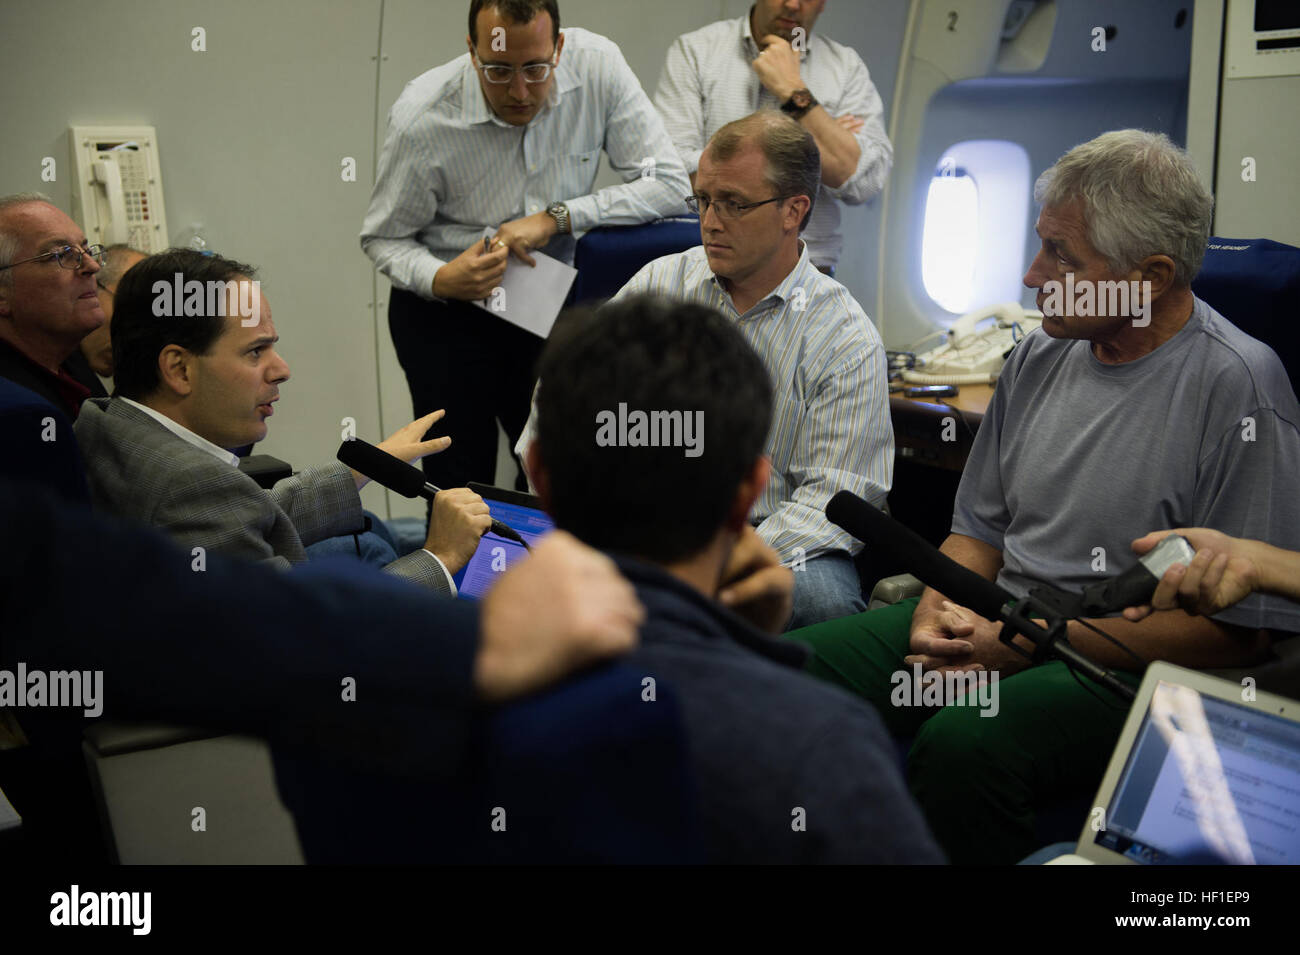 U.S. Secretary of Defense Chuck Hagel, right, listens during a press briefing aboard a plane en route to Malaysia Aug. 23, 2013. Hagel was on a nine-day trip to meet with defense leaders in Malaysia, Indonesia, Brunei and the Philippines. (DoD photo by Sgt. Aaron Hostutler, U.S. Marine Corps/Released) Secretary of Defense 130823-M-EV637-105 Stock Photo